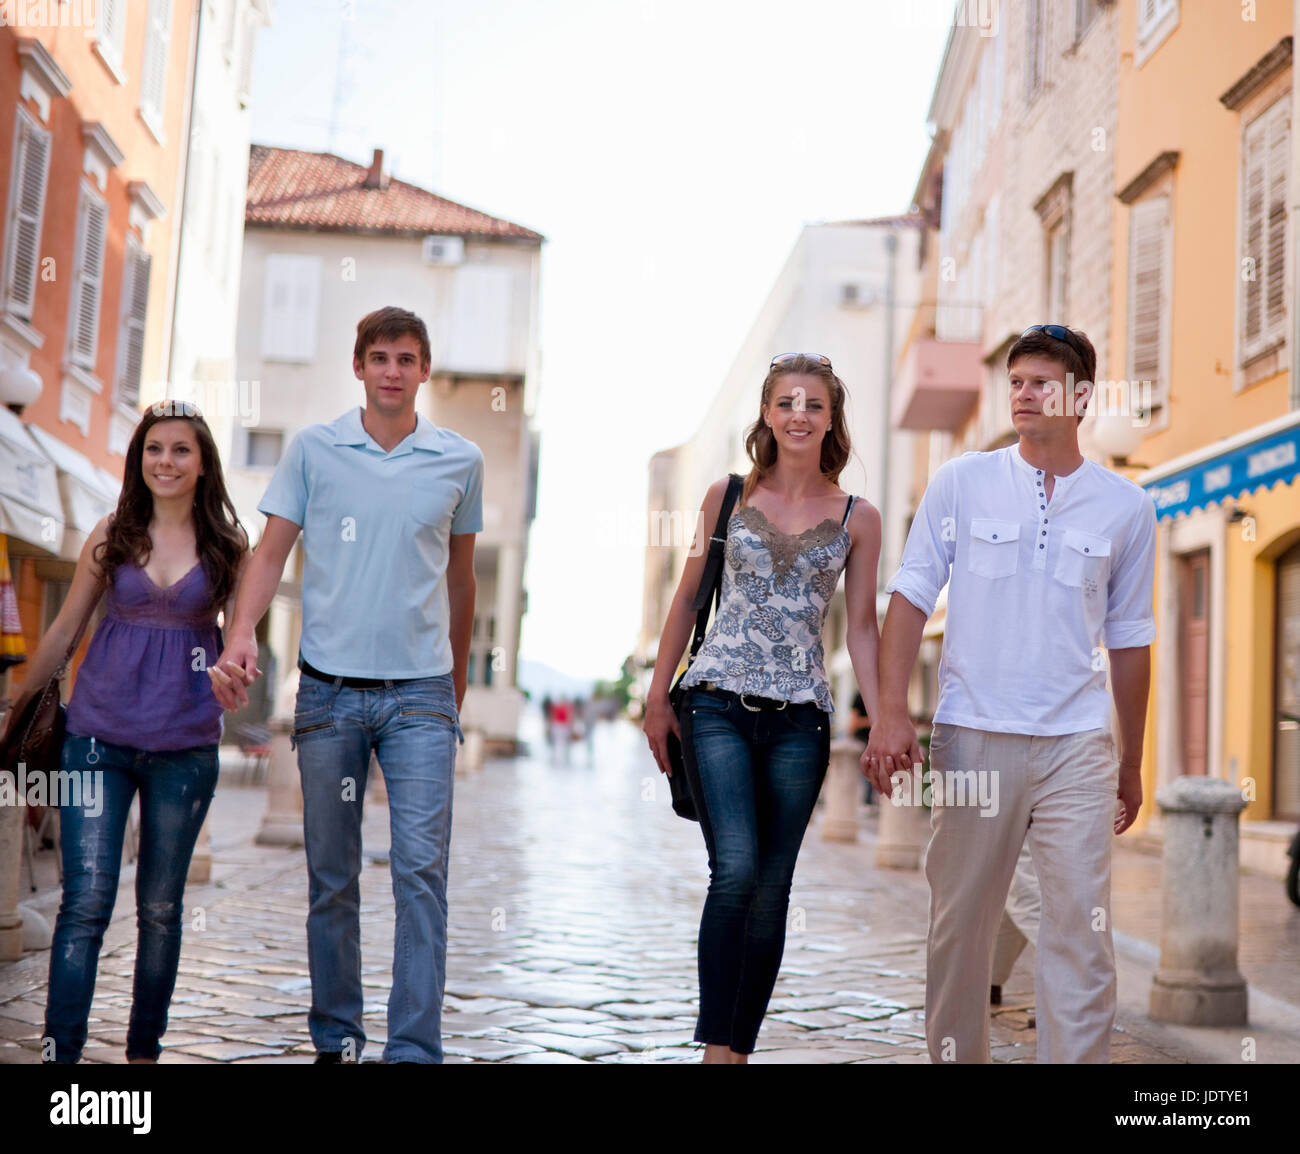 Couples walking on cobbled street Stock Photo